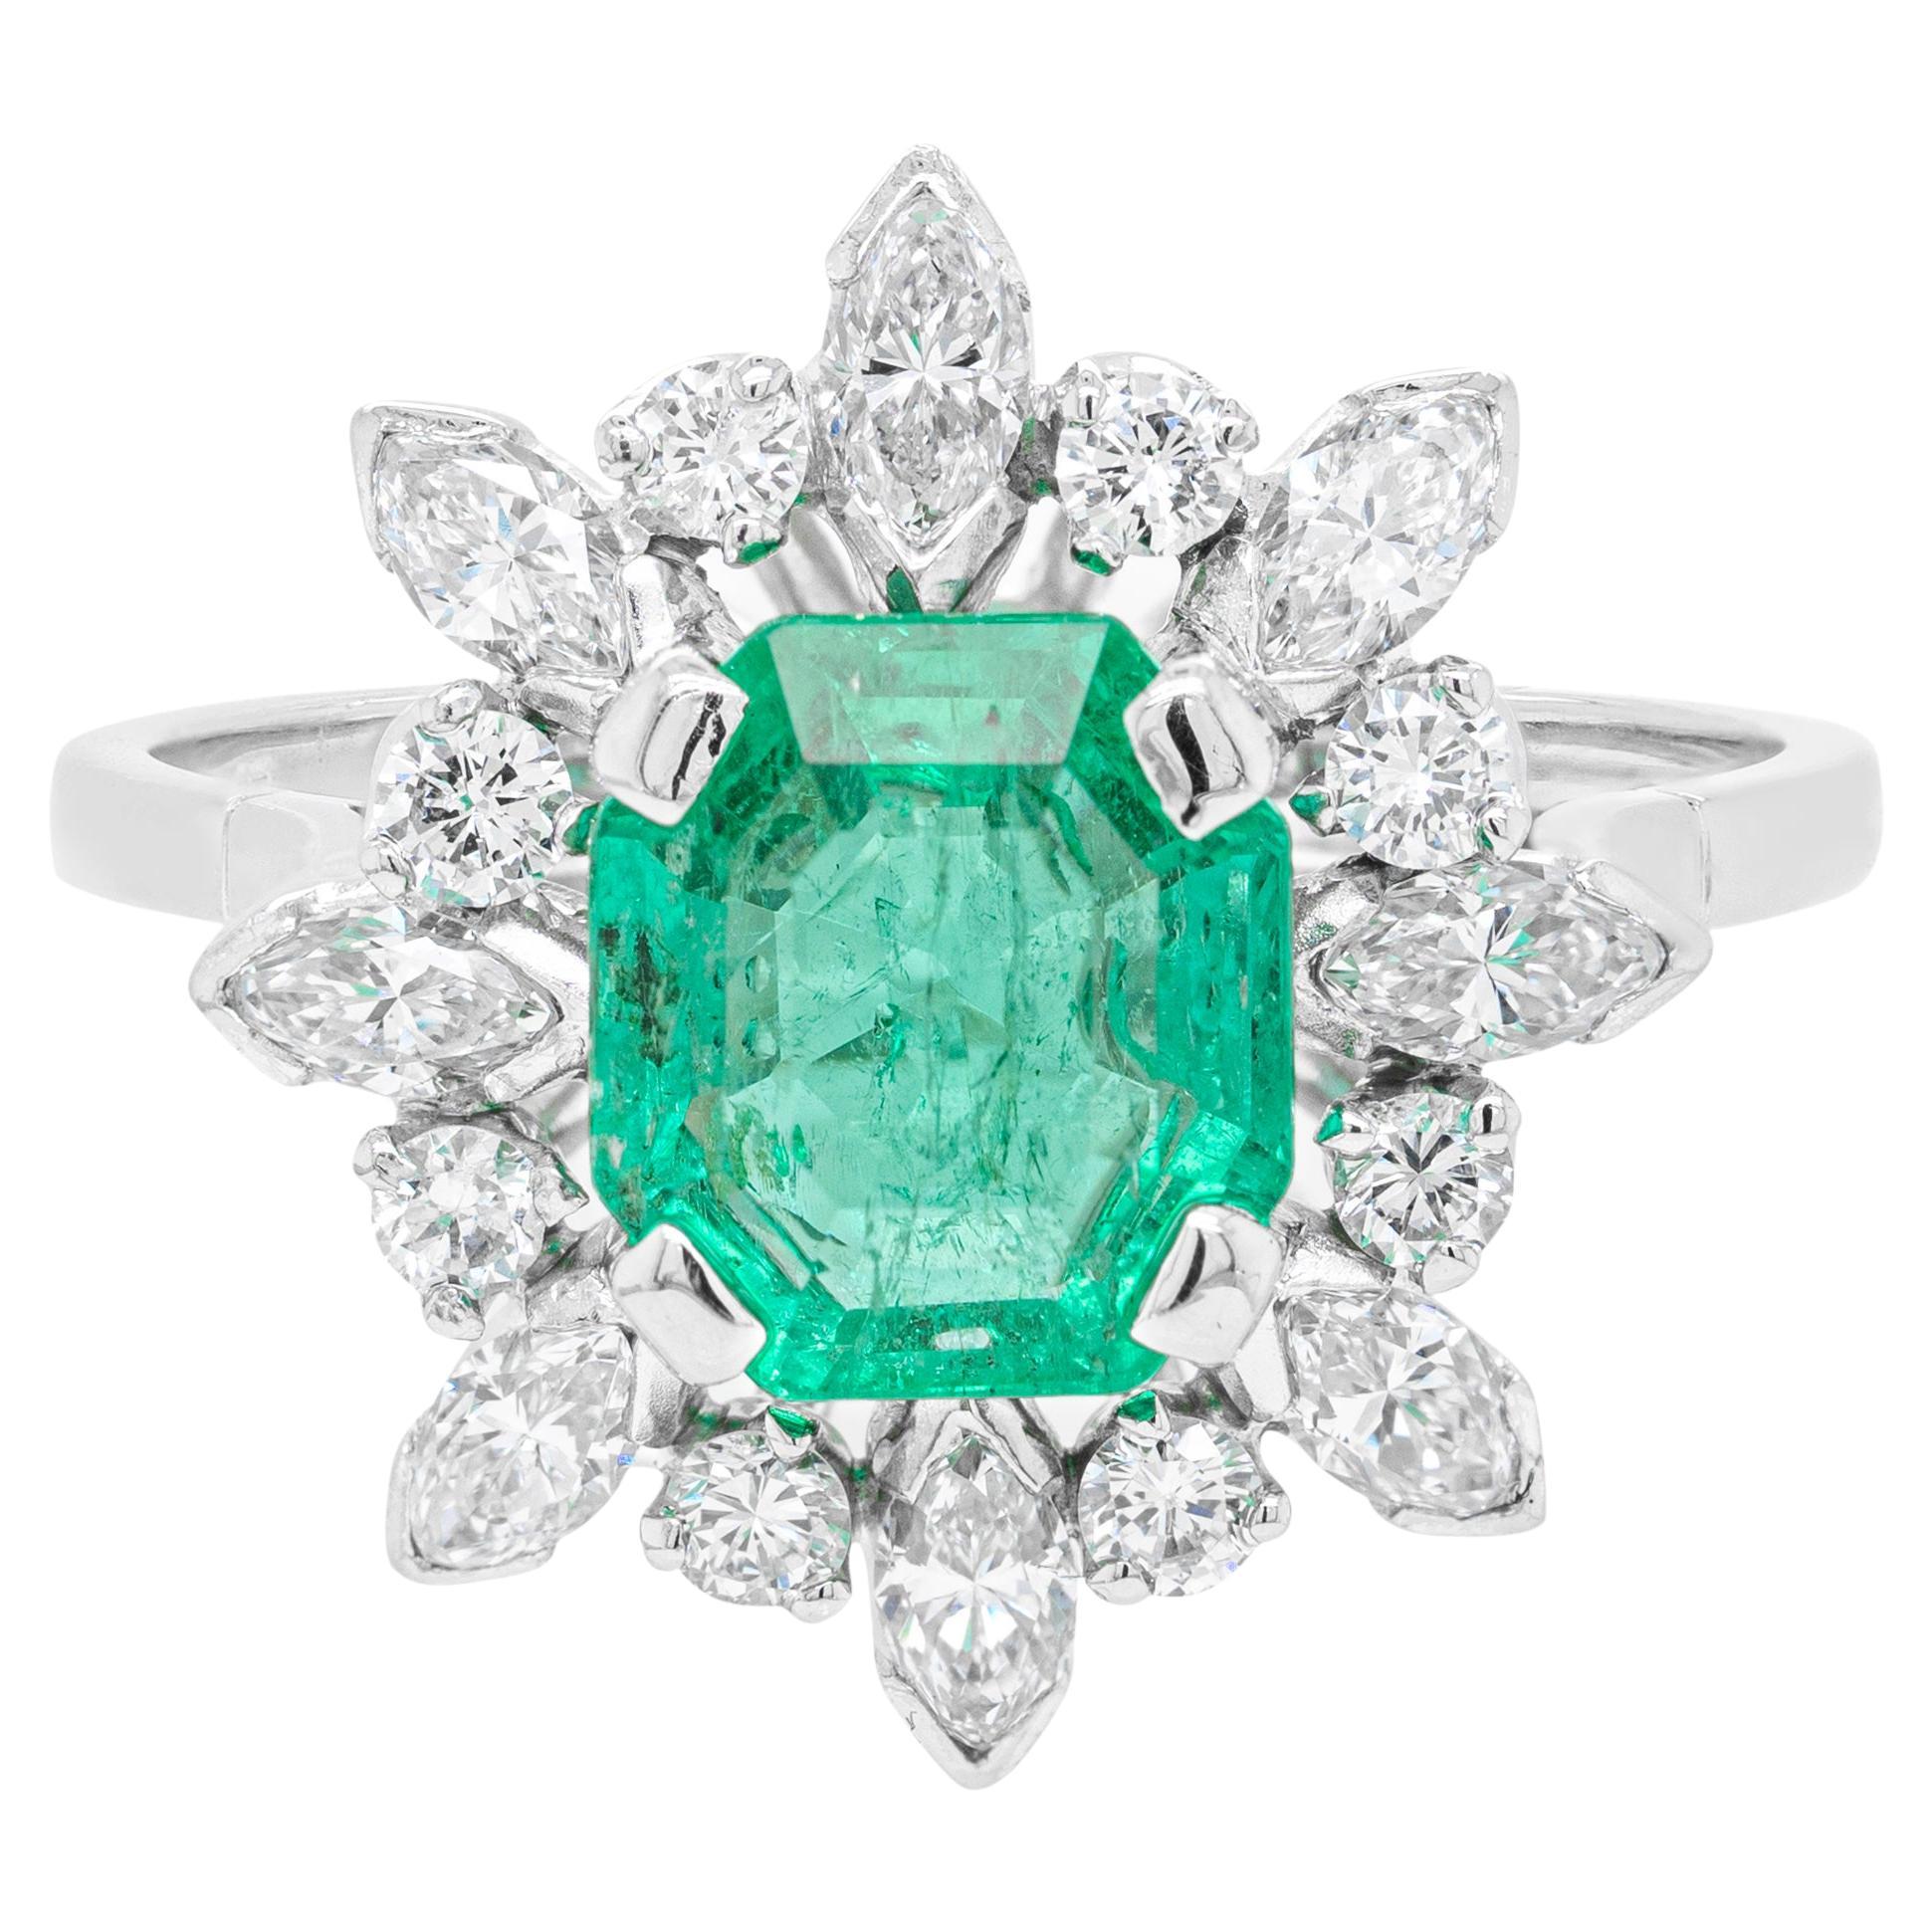 2.27ct Emerald and Diamond Cluster 18 Carat White Gold Engagement Ring, c. 1960s